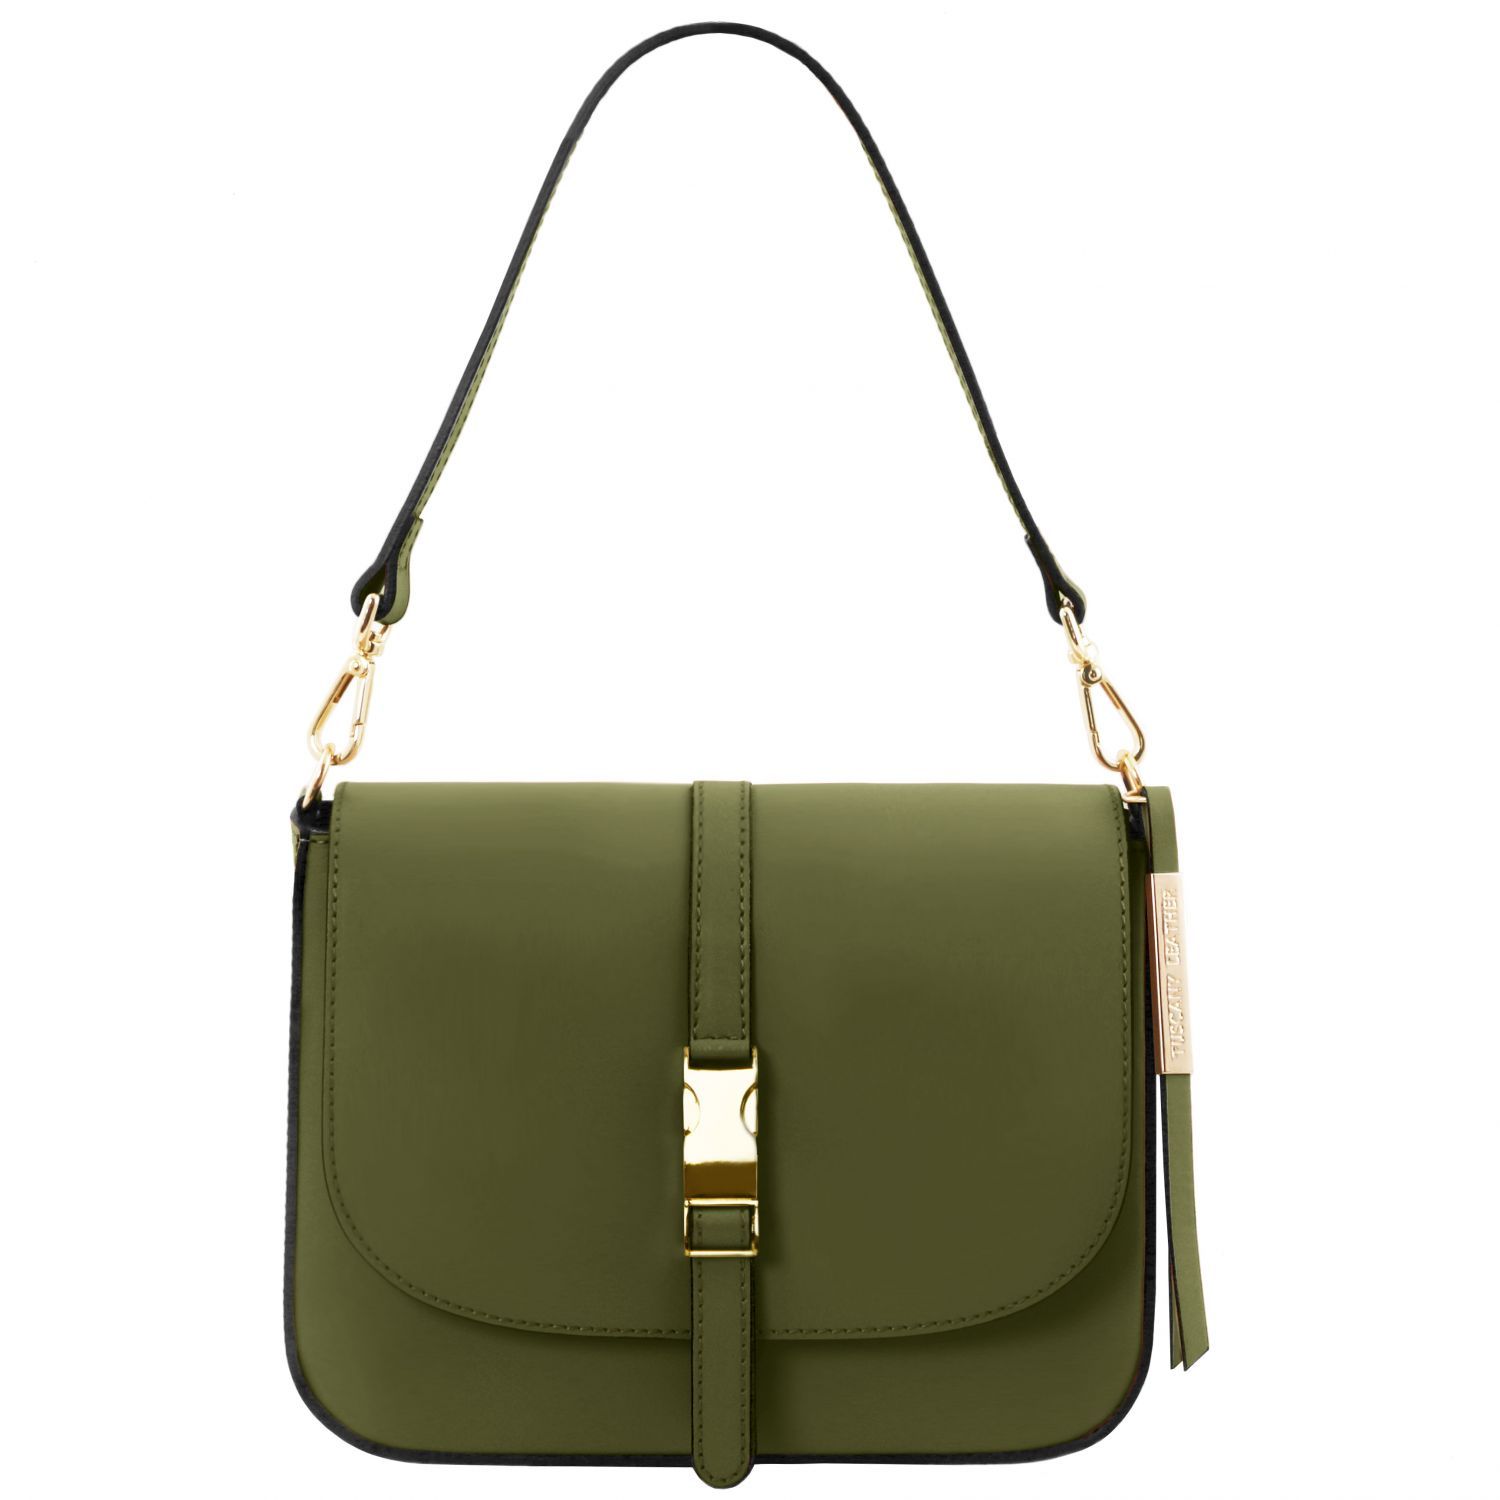 Olive Green Purse Women | Literacy Ontario Central South